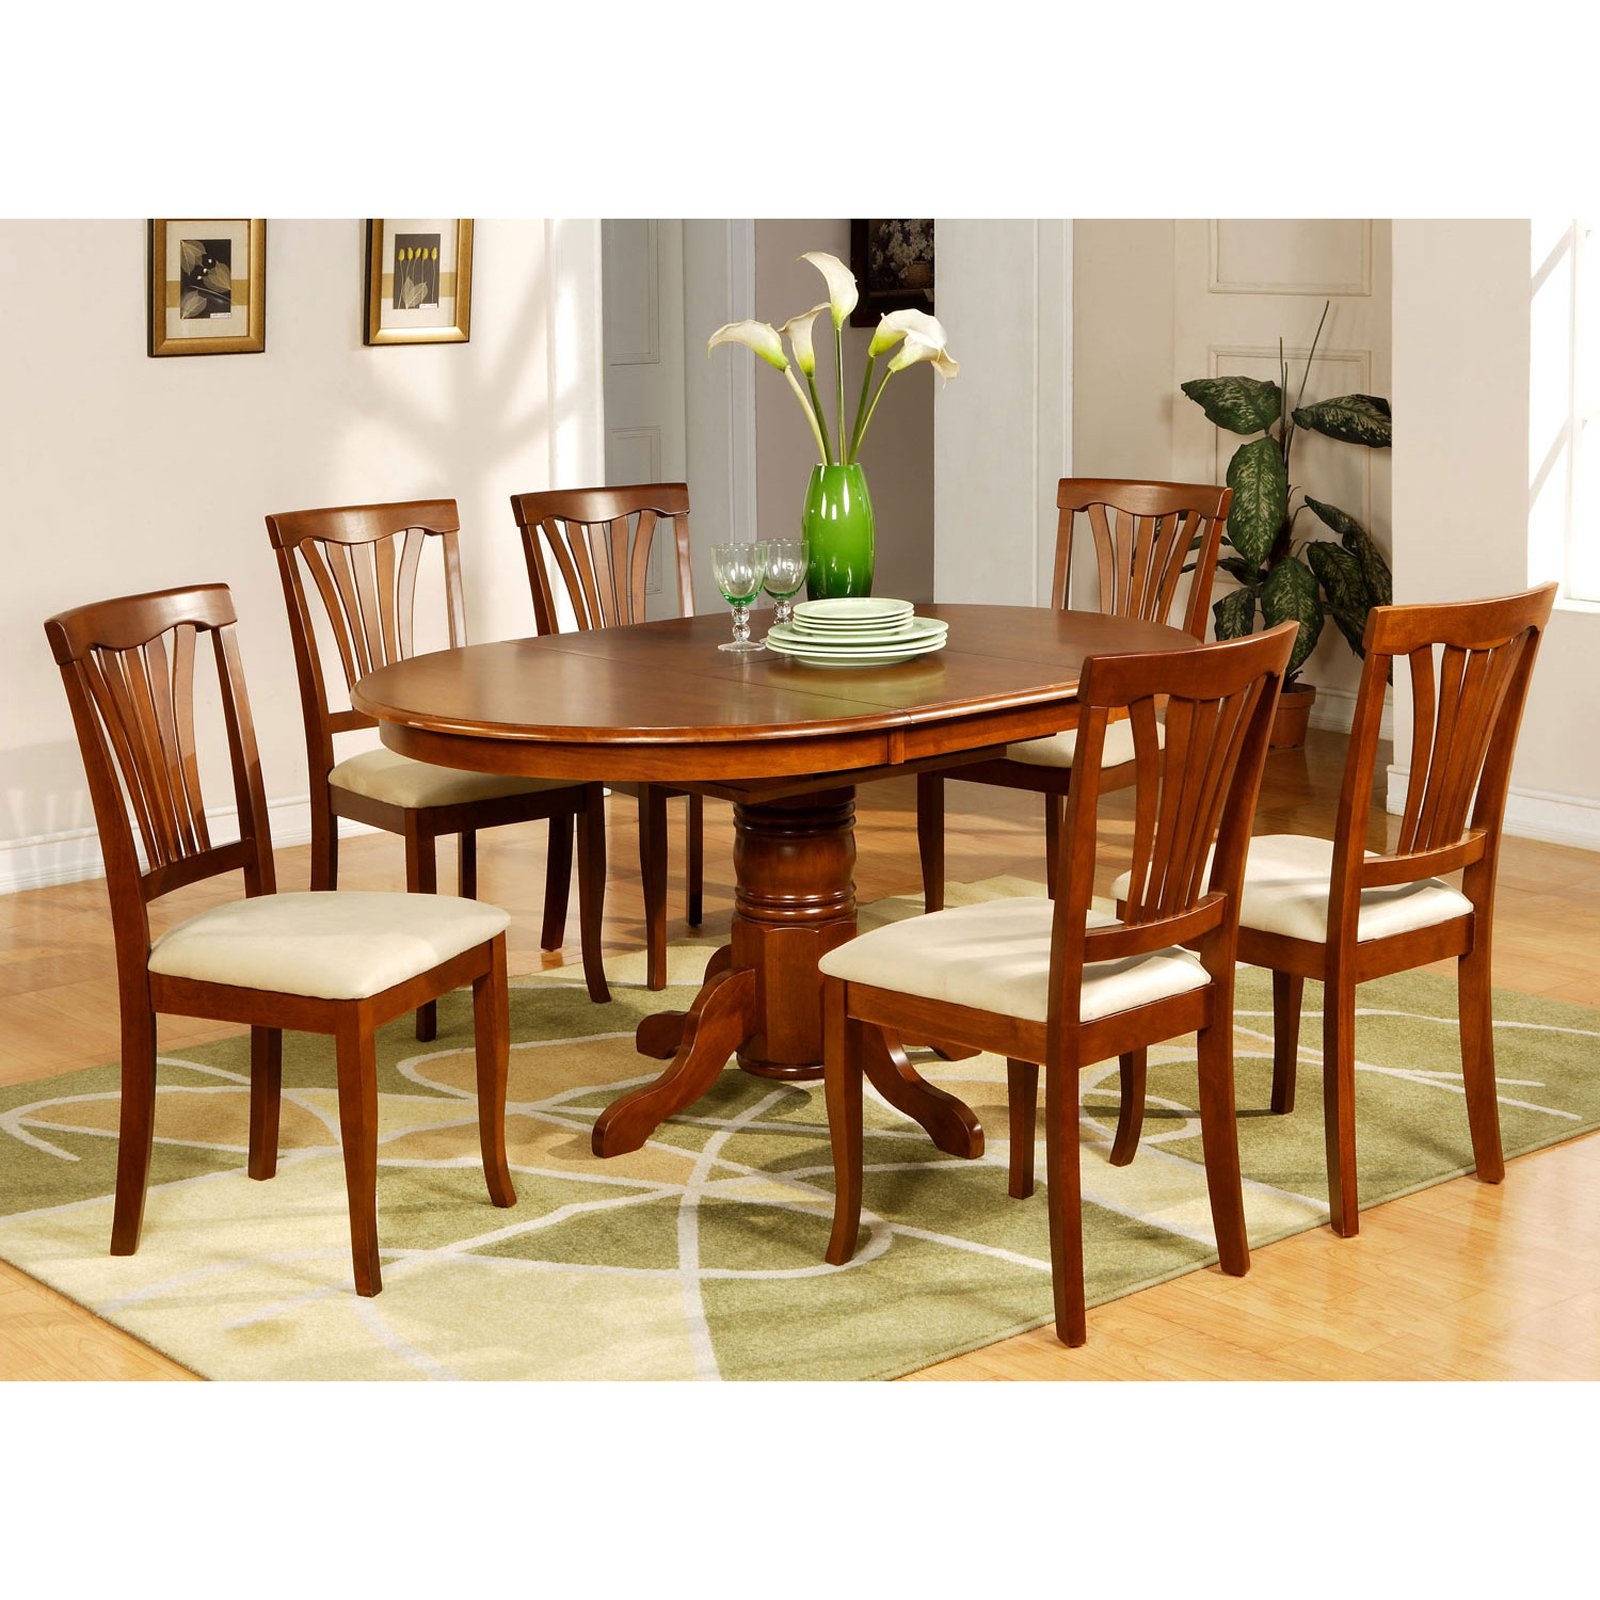 East West Furniture AVON7-SBR-C 7PC Oval Dining Set with Single Pedestal with 18 in. butterfly leaf and 6 padded seat chairs